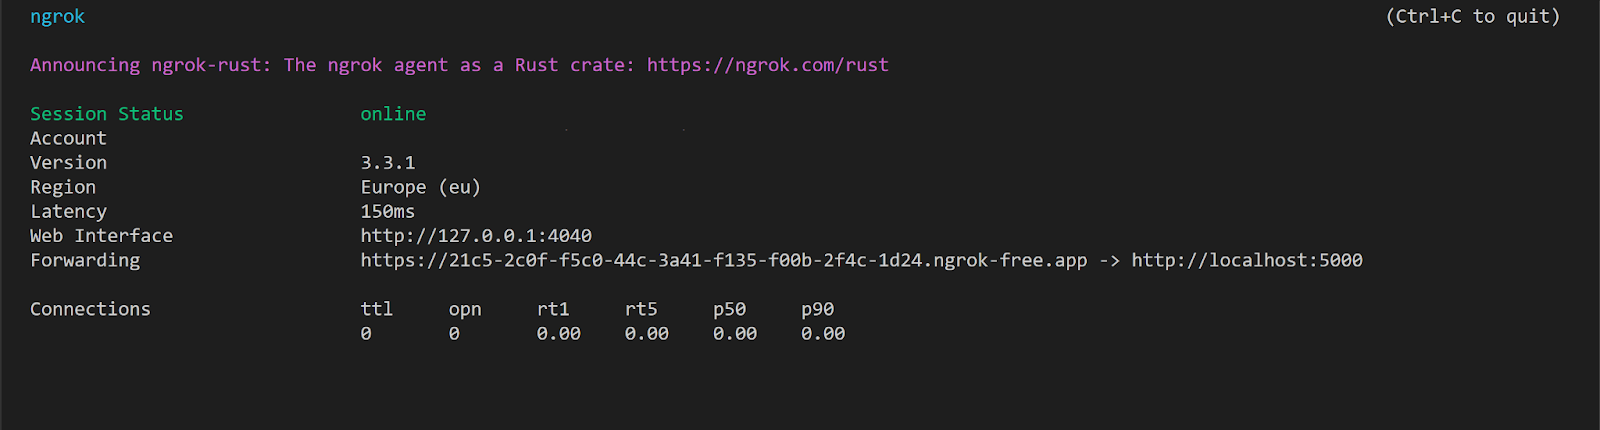 Terminal showing the https forwarding URL generated by ngrok